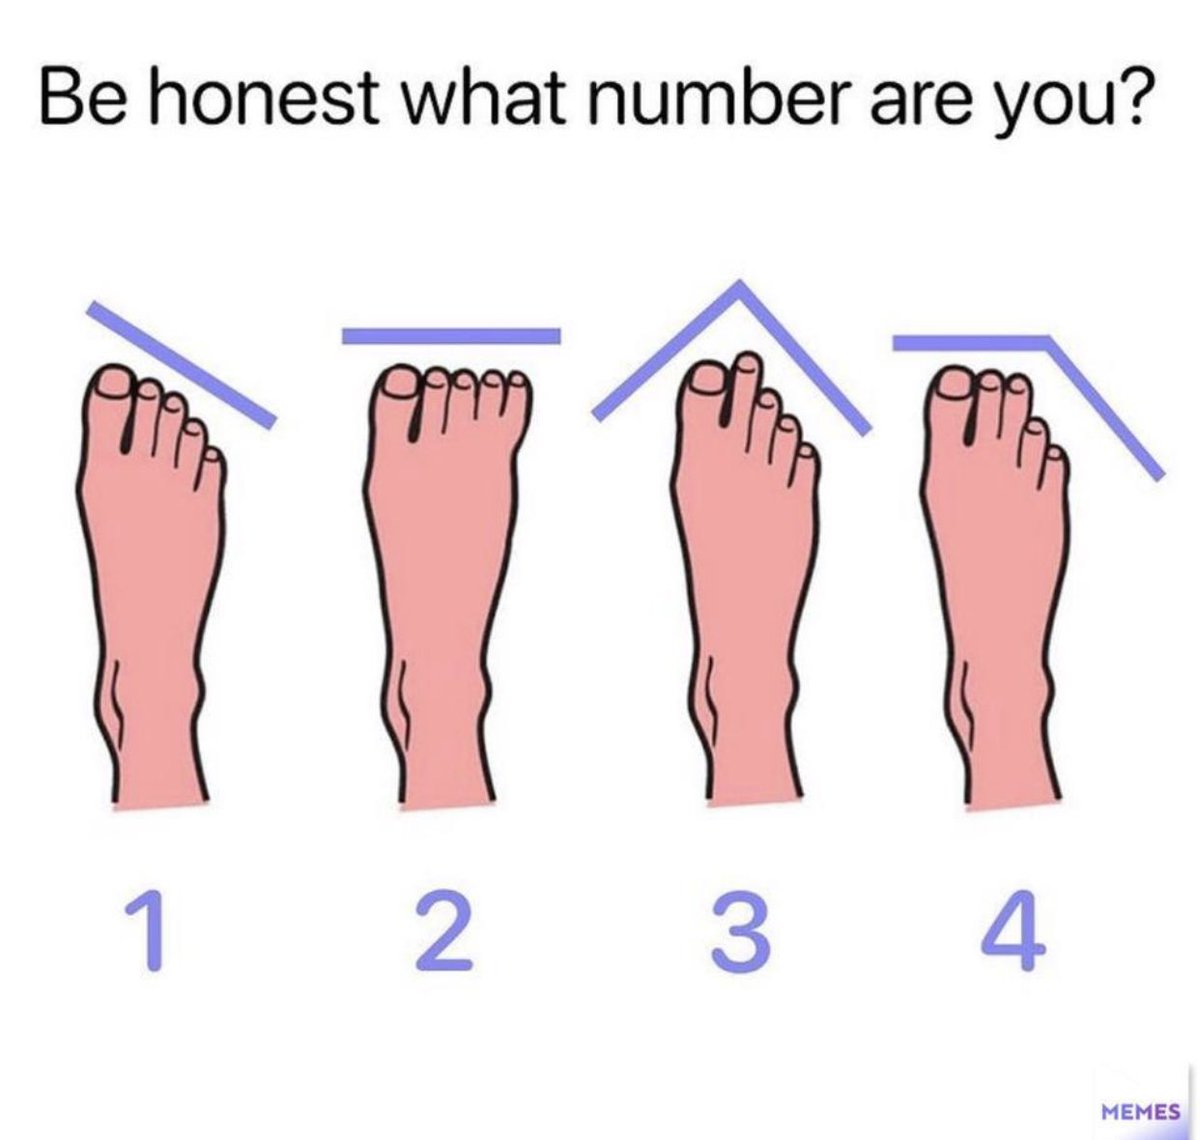 What number are you?